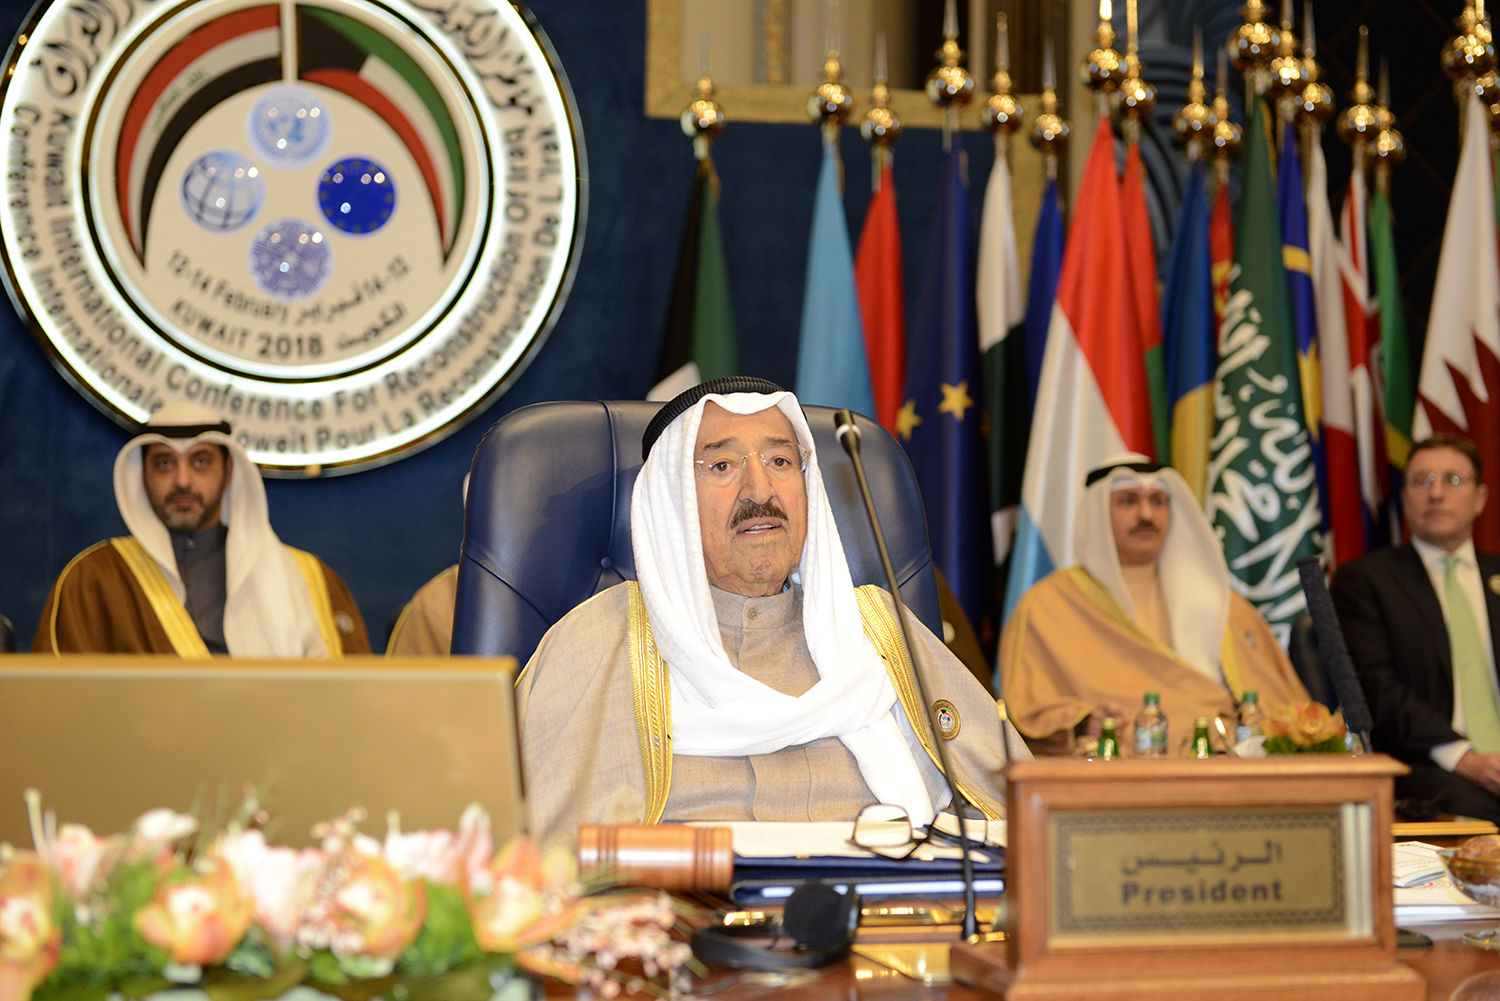 His Highness the Amir Sheikh Sabah Al-Ahmad Al-Jaber Al-Sabah during the official inauguration of the Kuwait International Conference for the Reconstruction of Iraq (KICRI)